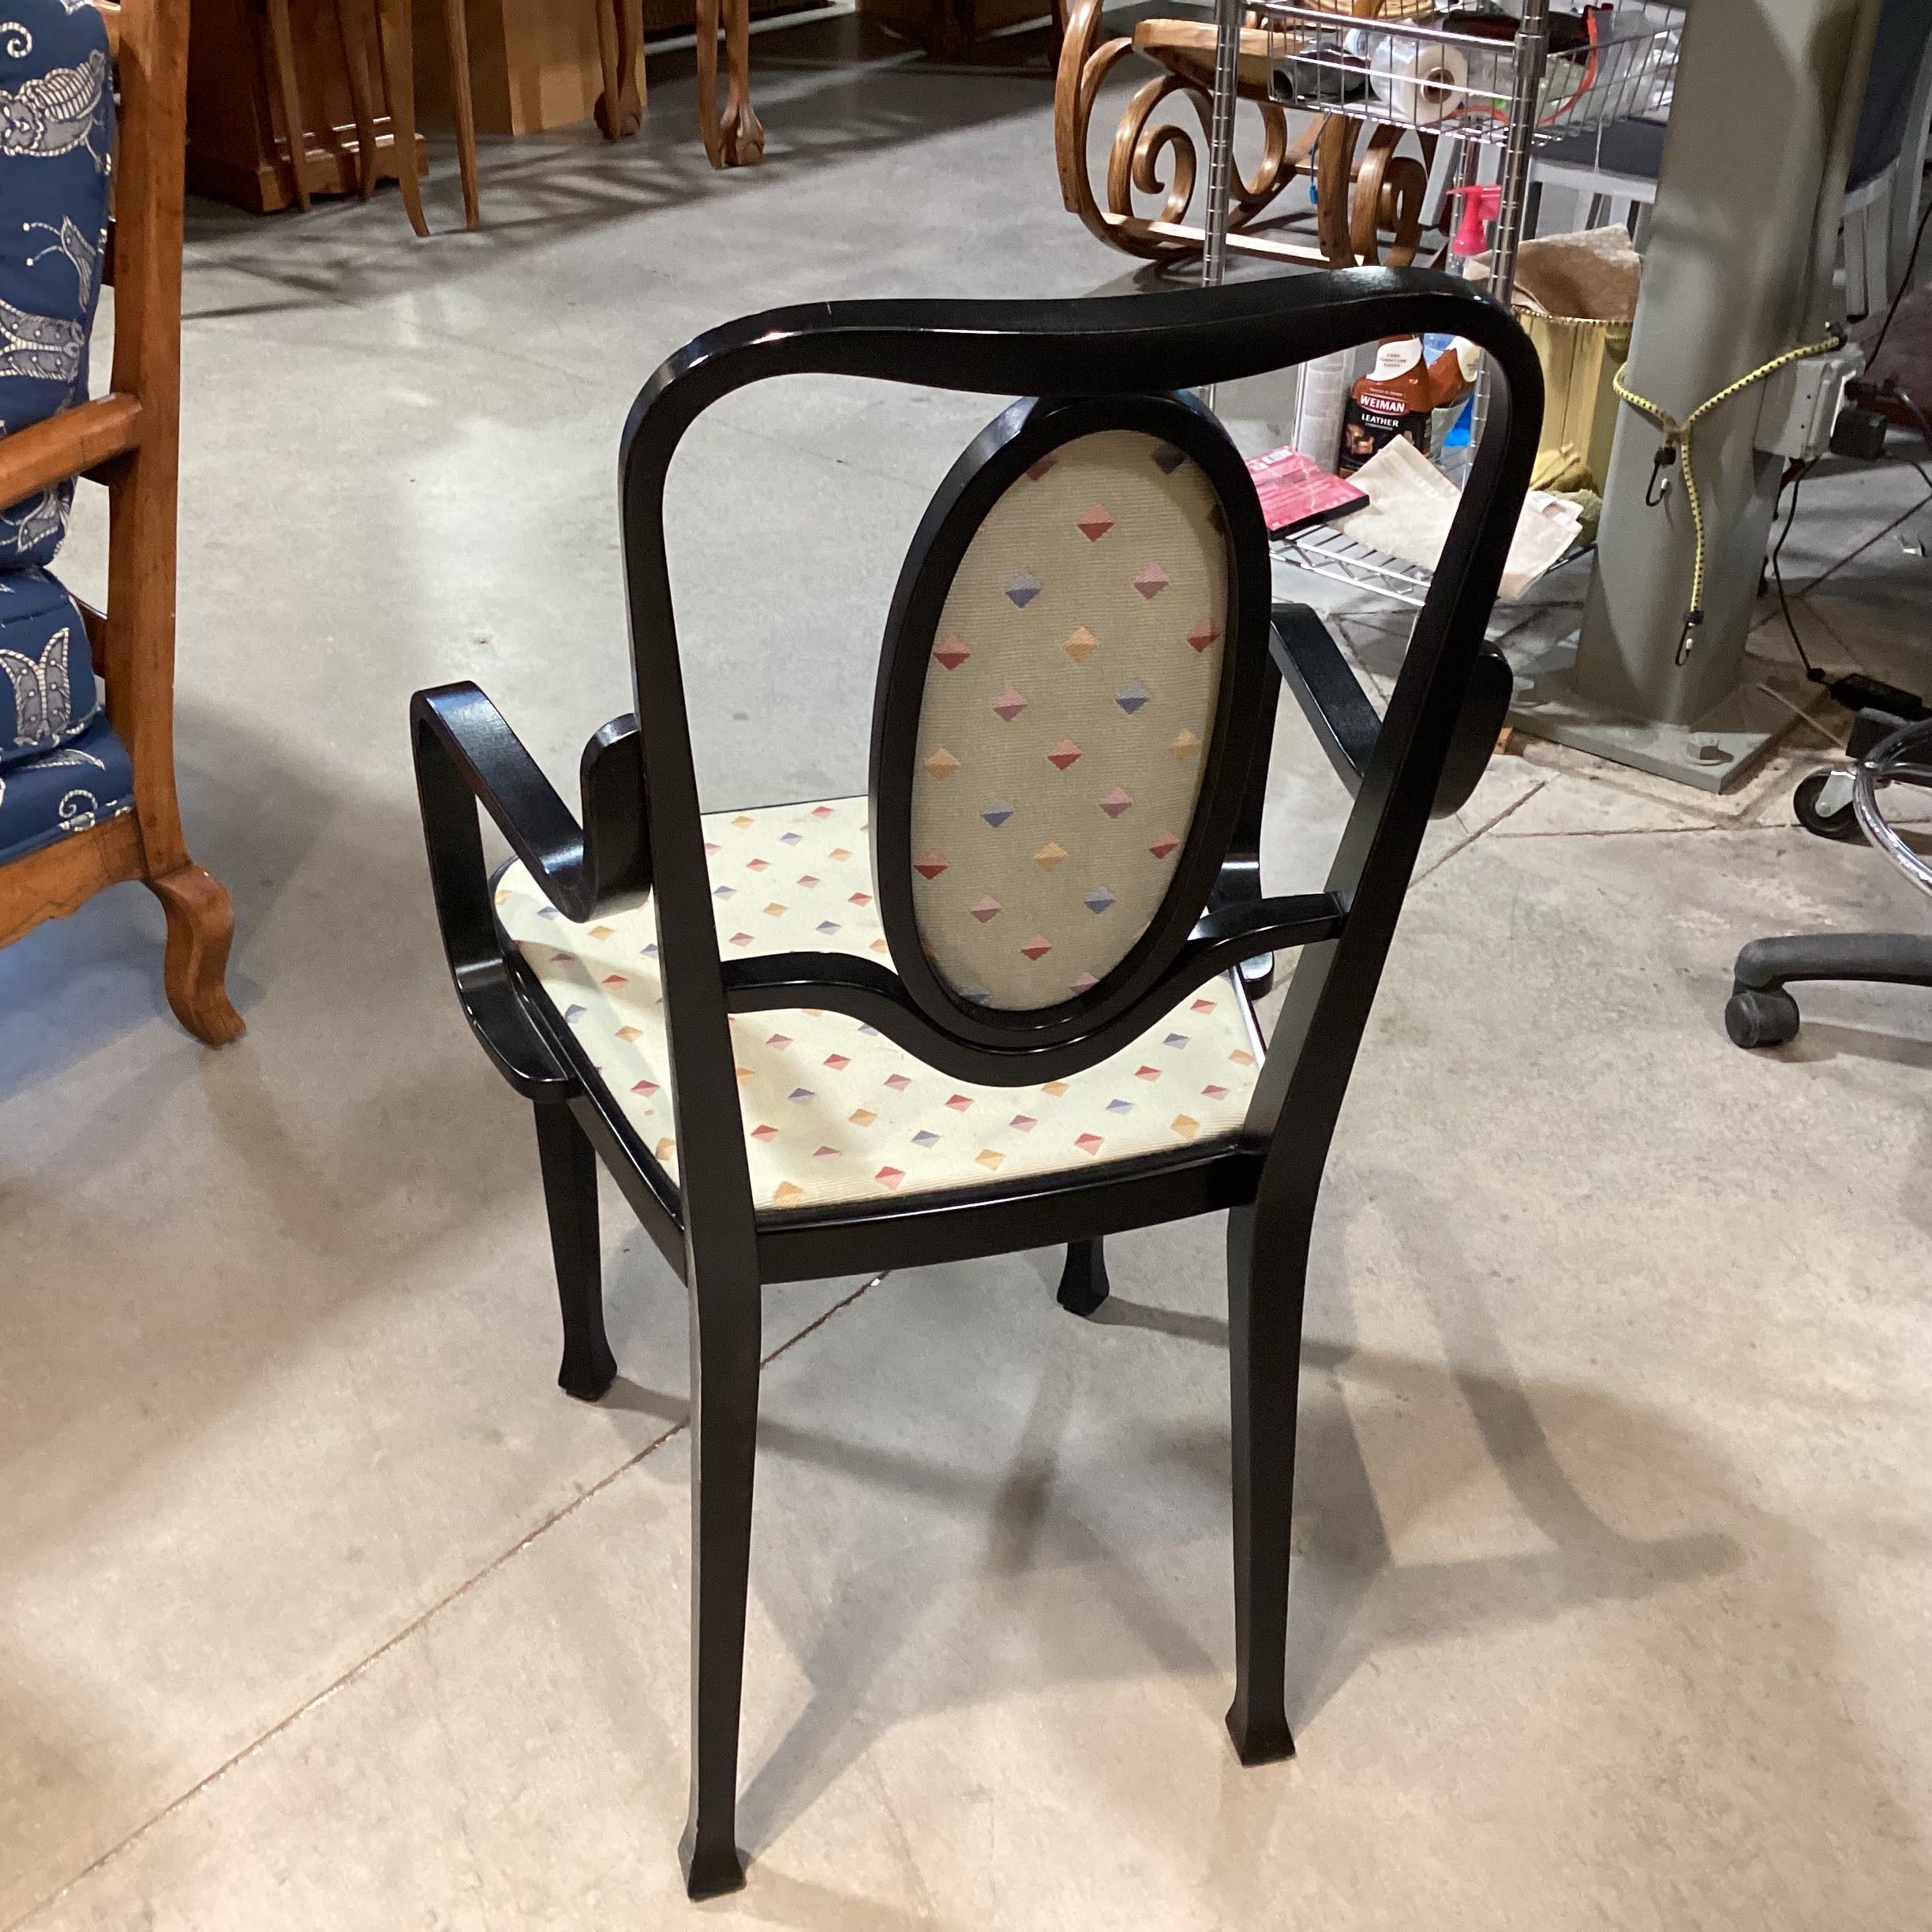 SET of 6 Classic Vienna Black Lacquer & Diamond Pattern Dining Chairs